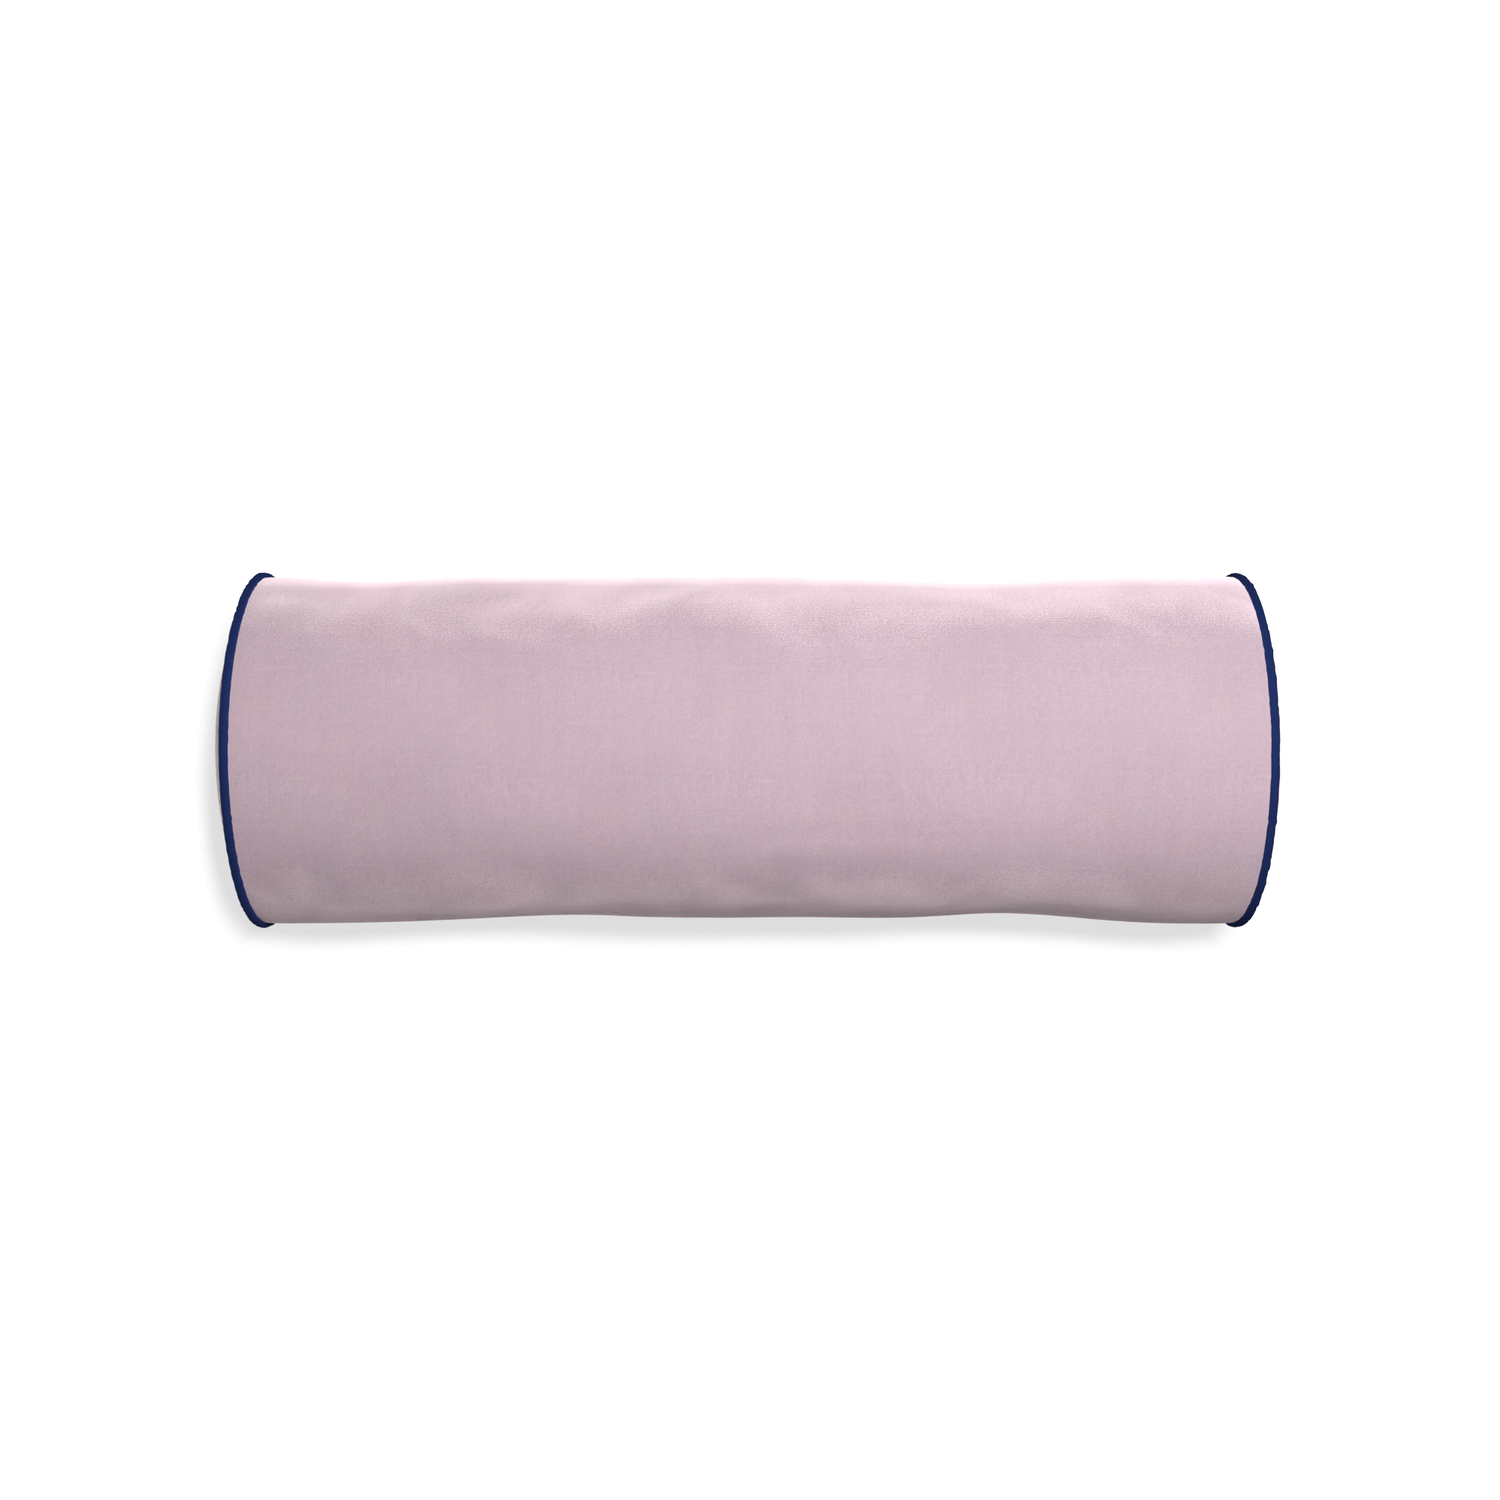 bolster lilac velvet pillow with navy blue piping